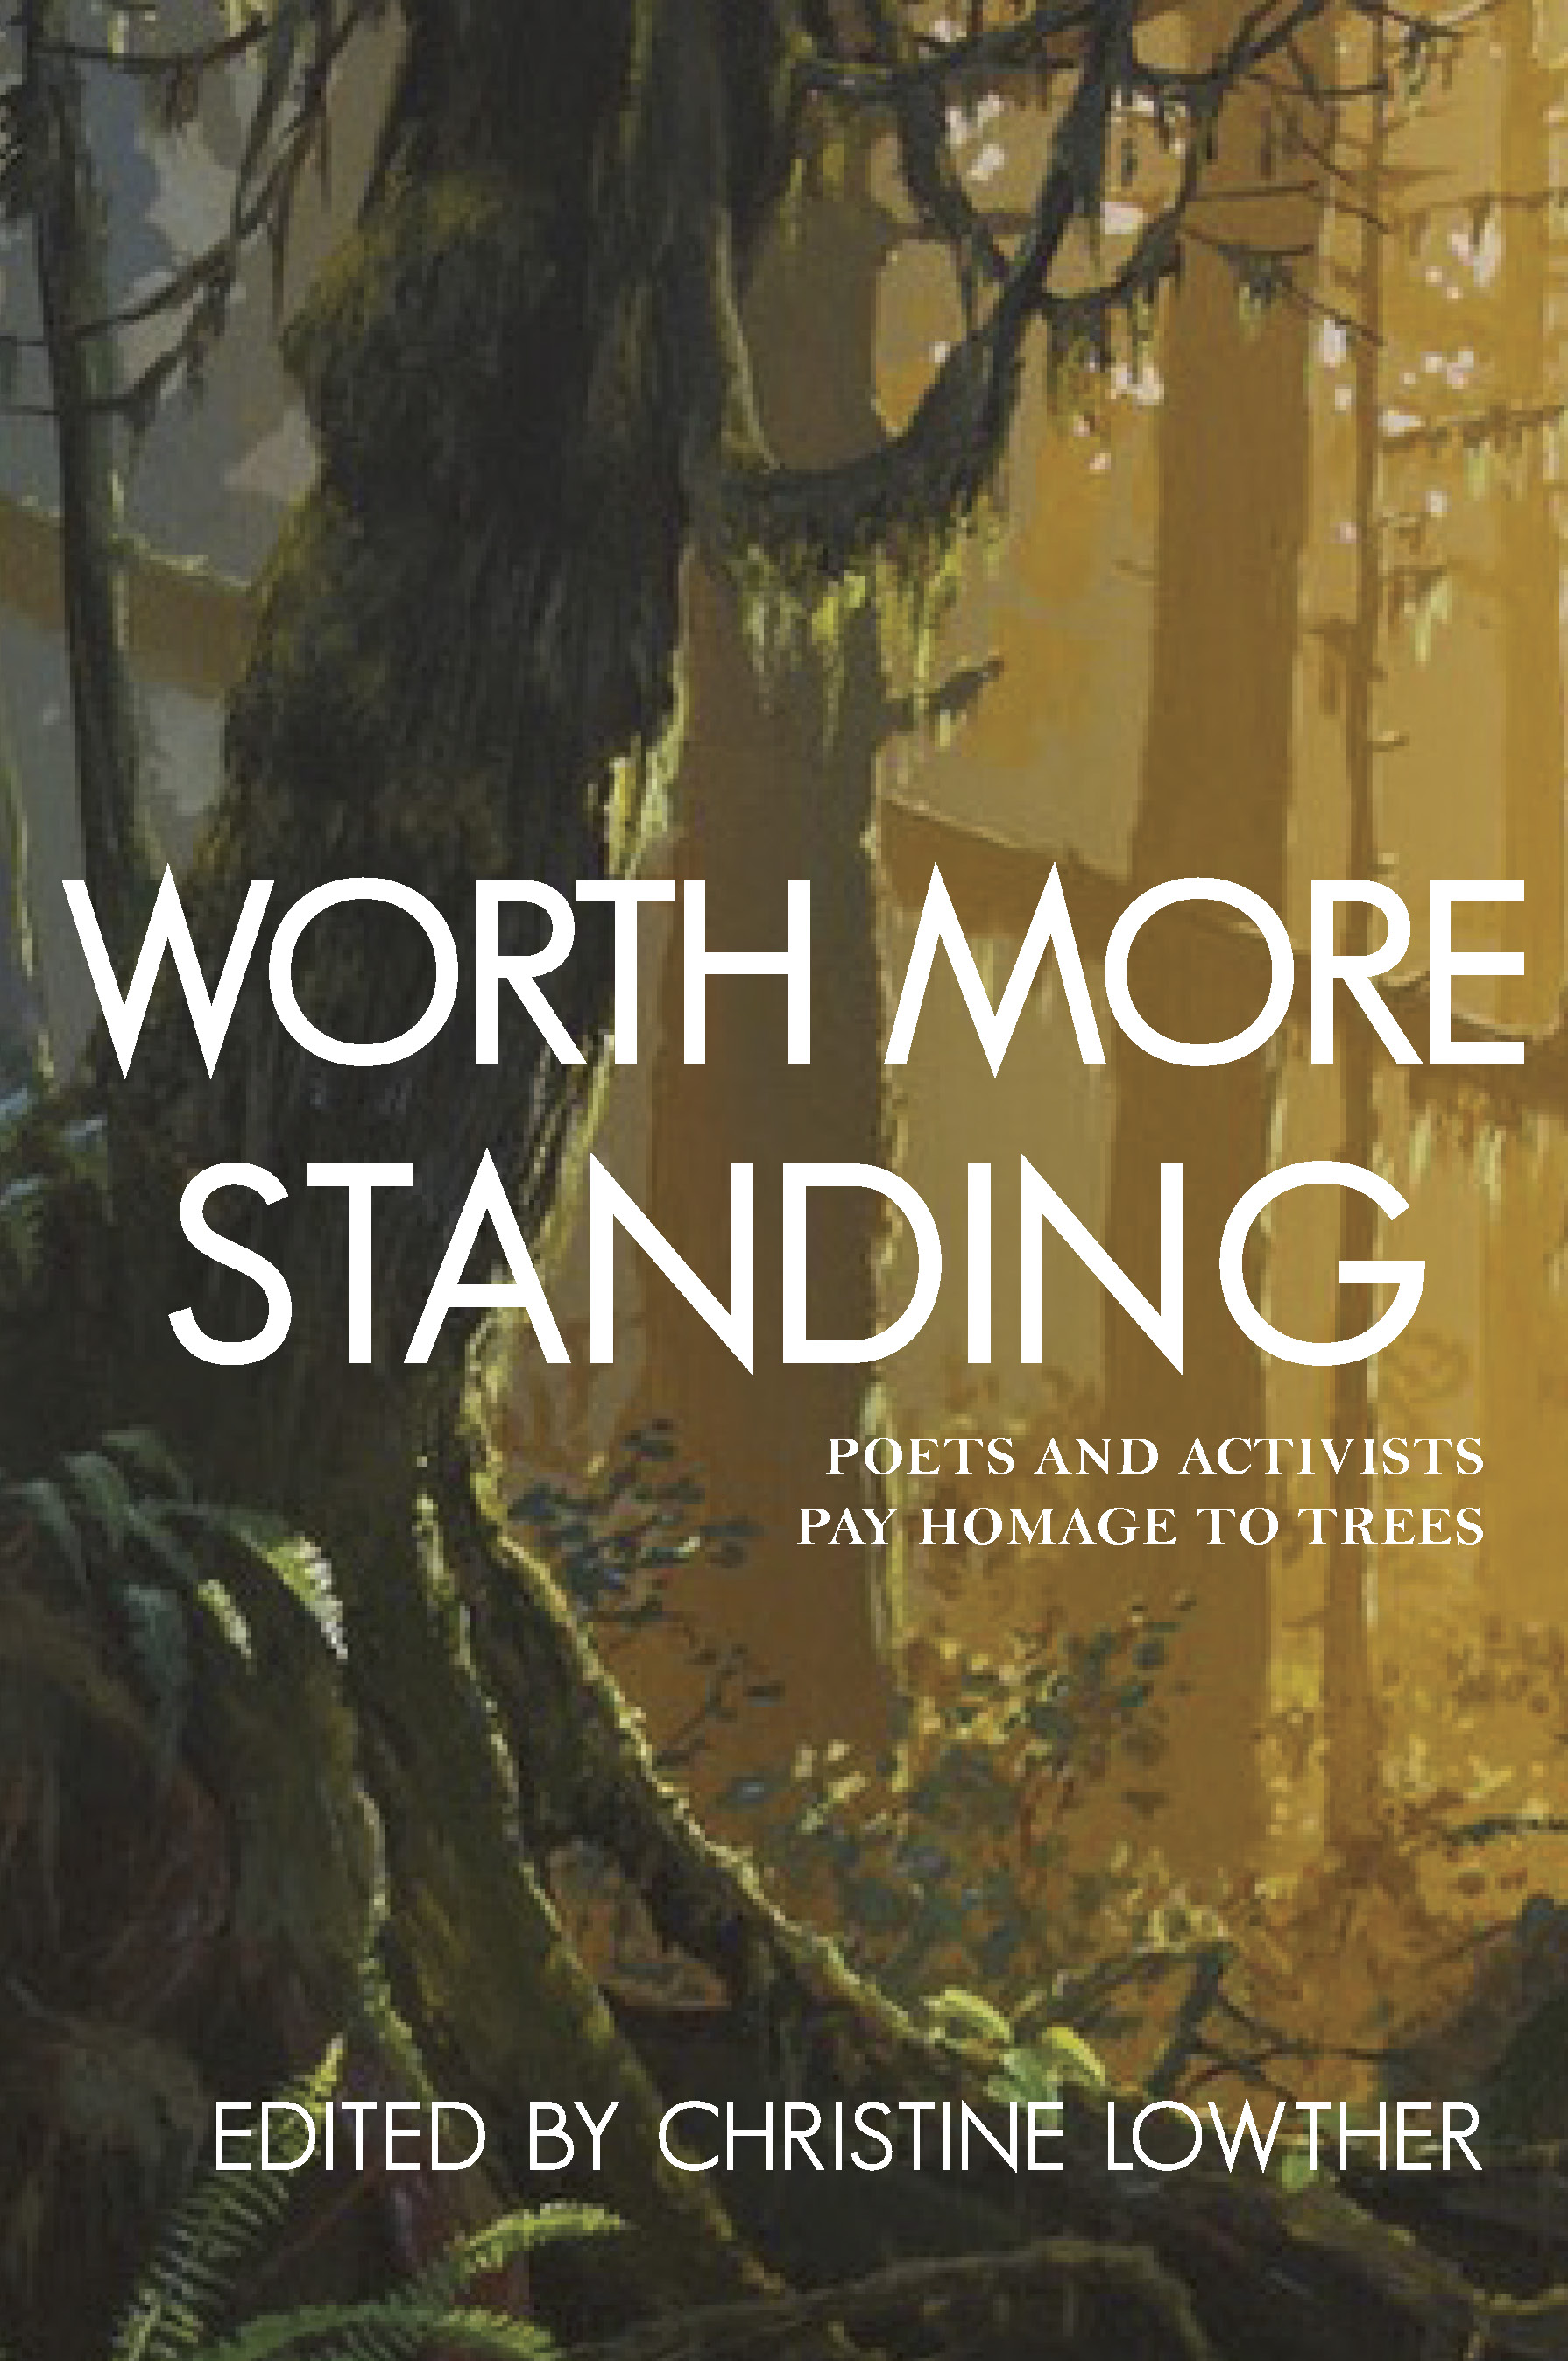 WORTH-MORE-STANDING-COVER